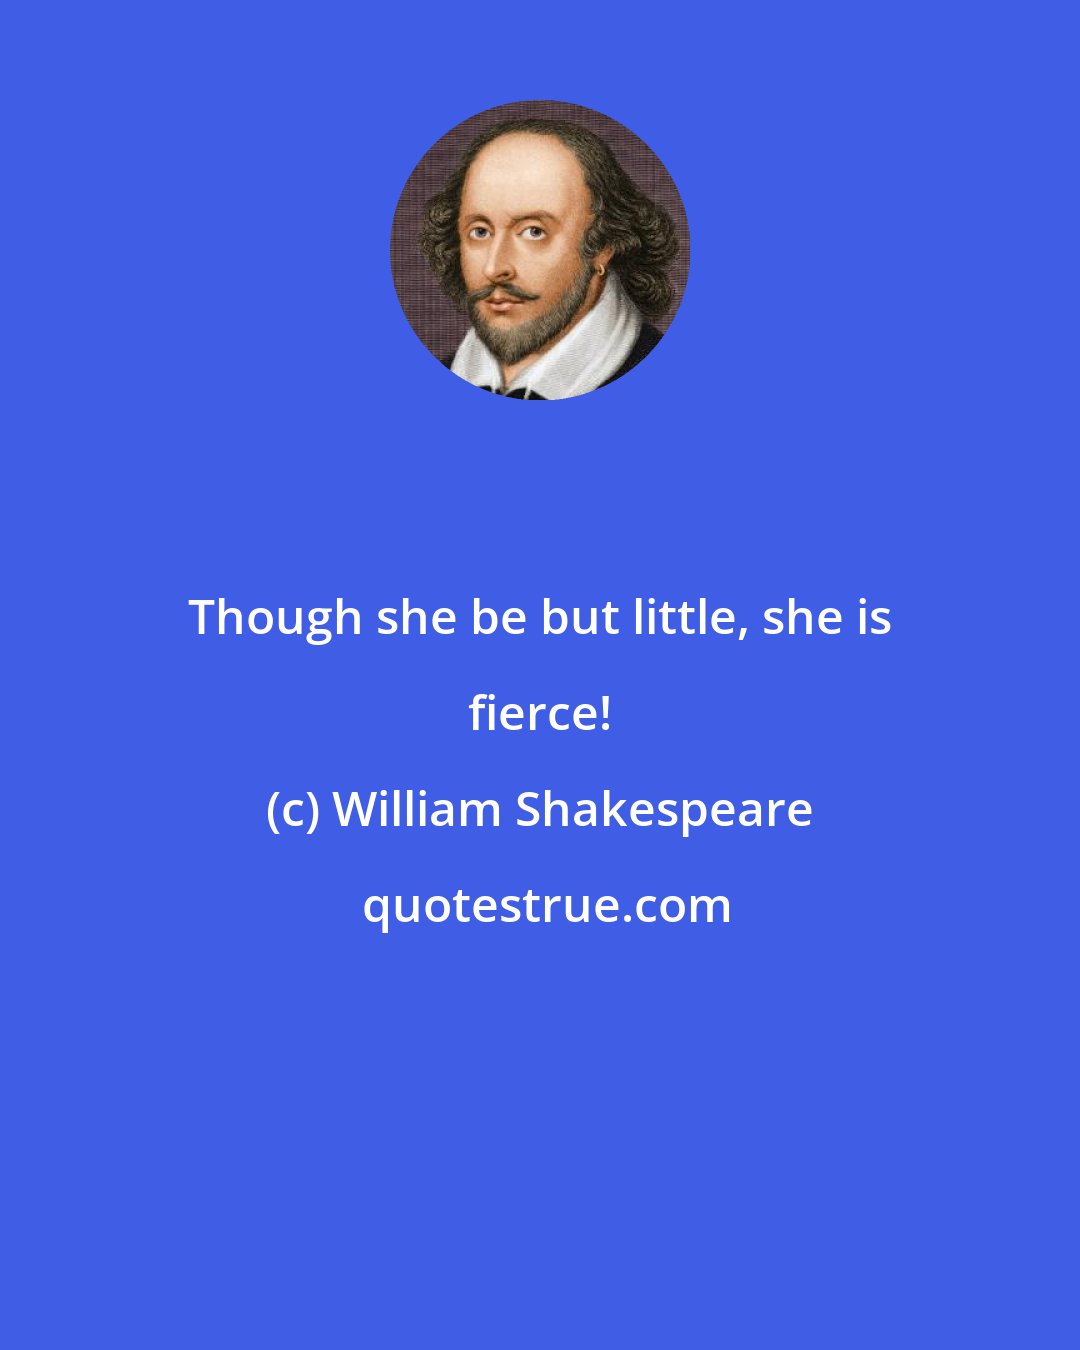 William Shakespeare: Though she be but little, she is fierce!